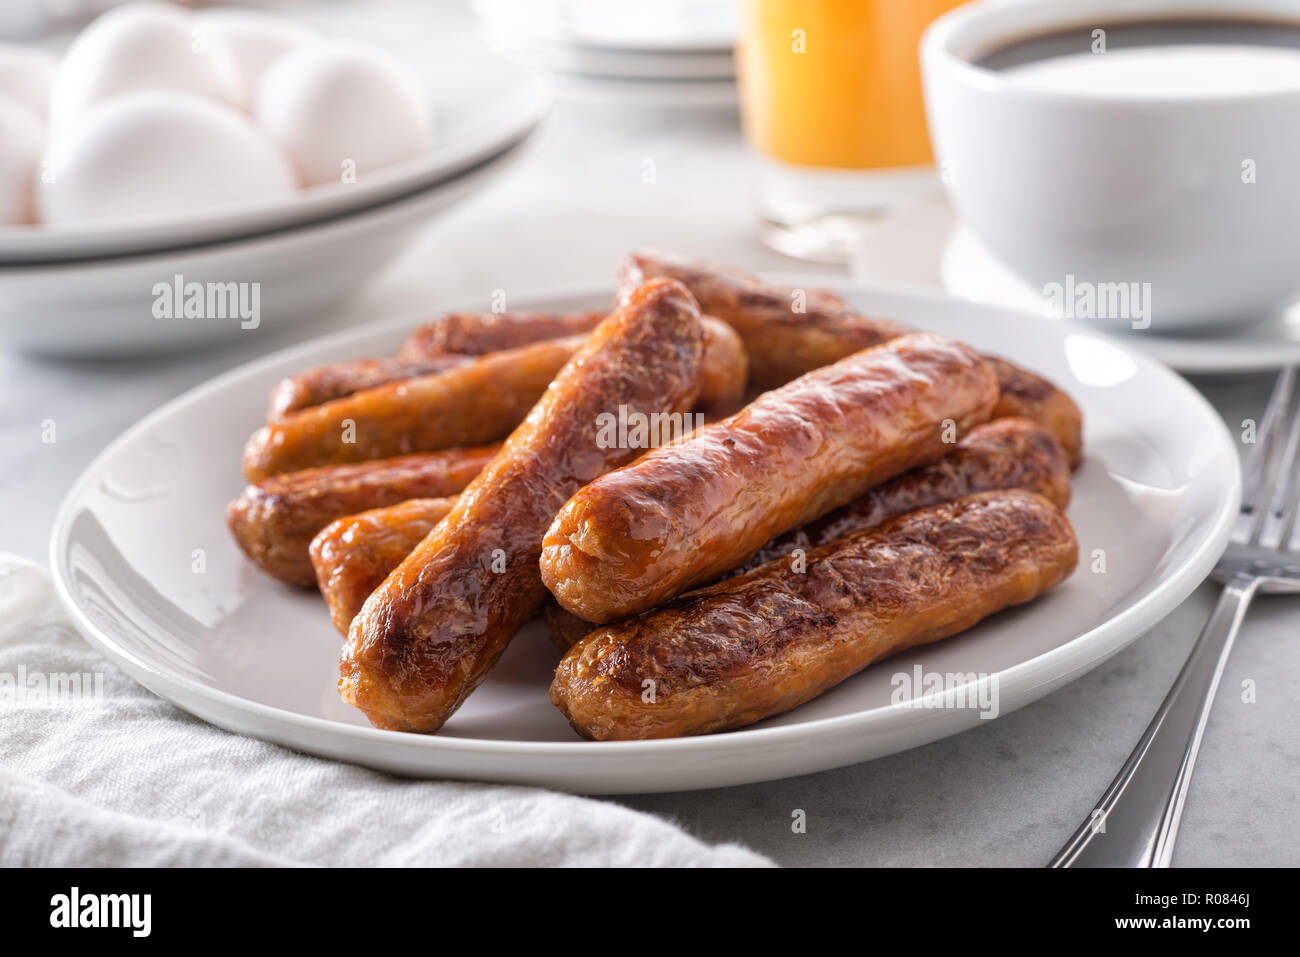 A plate of delicious cooked breakfast sausage with coffee, orange juice and eggs. Stock Photo